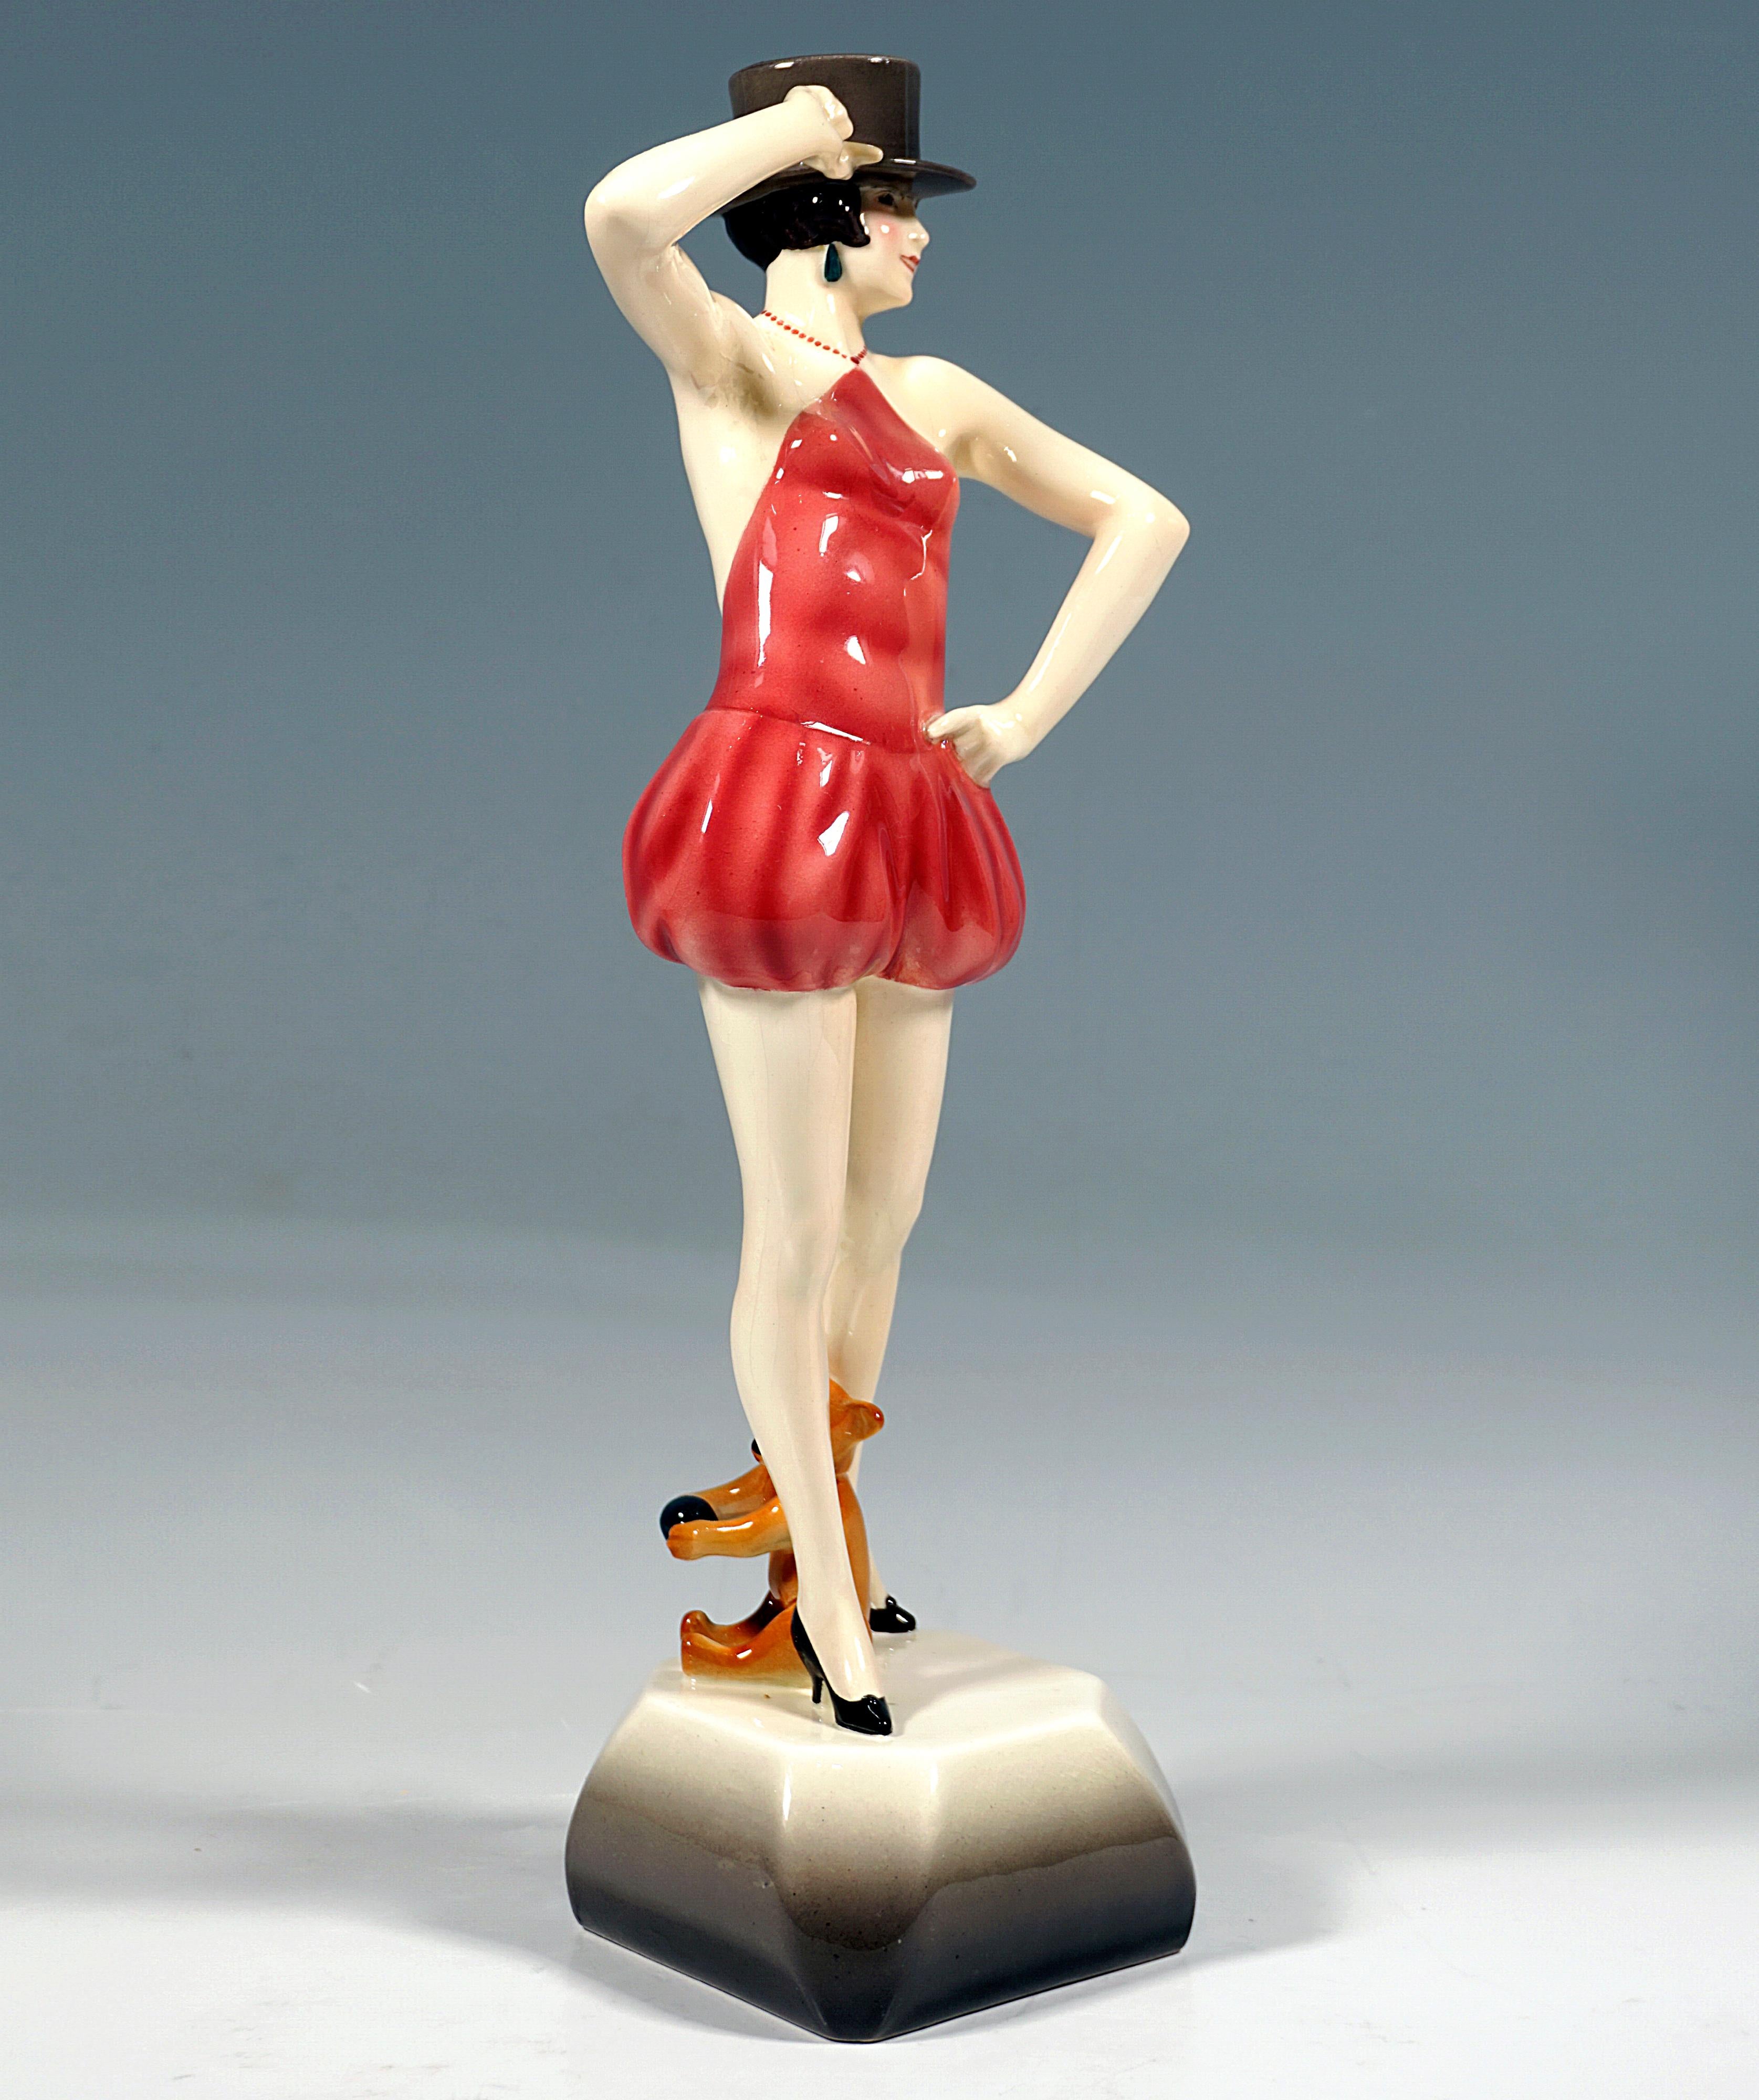 Very rare Viennese ceramic figure from the late 1920s:
Young, fancy dancer in a tight costume with a shoulderless and backless top held by a pearl necklace and short harem pants, black heels on the feet, posing with a dark grey-brown top hat on her